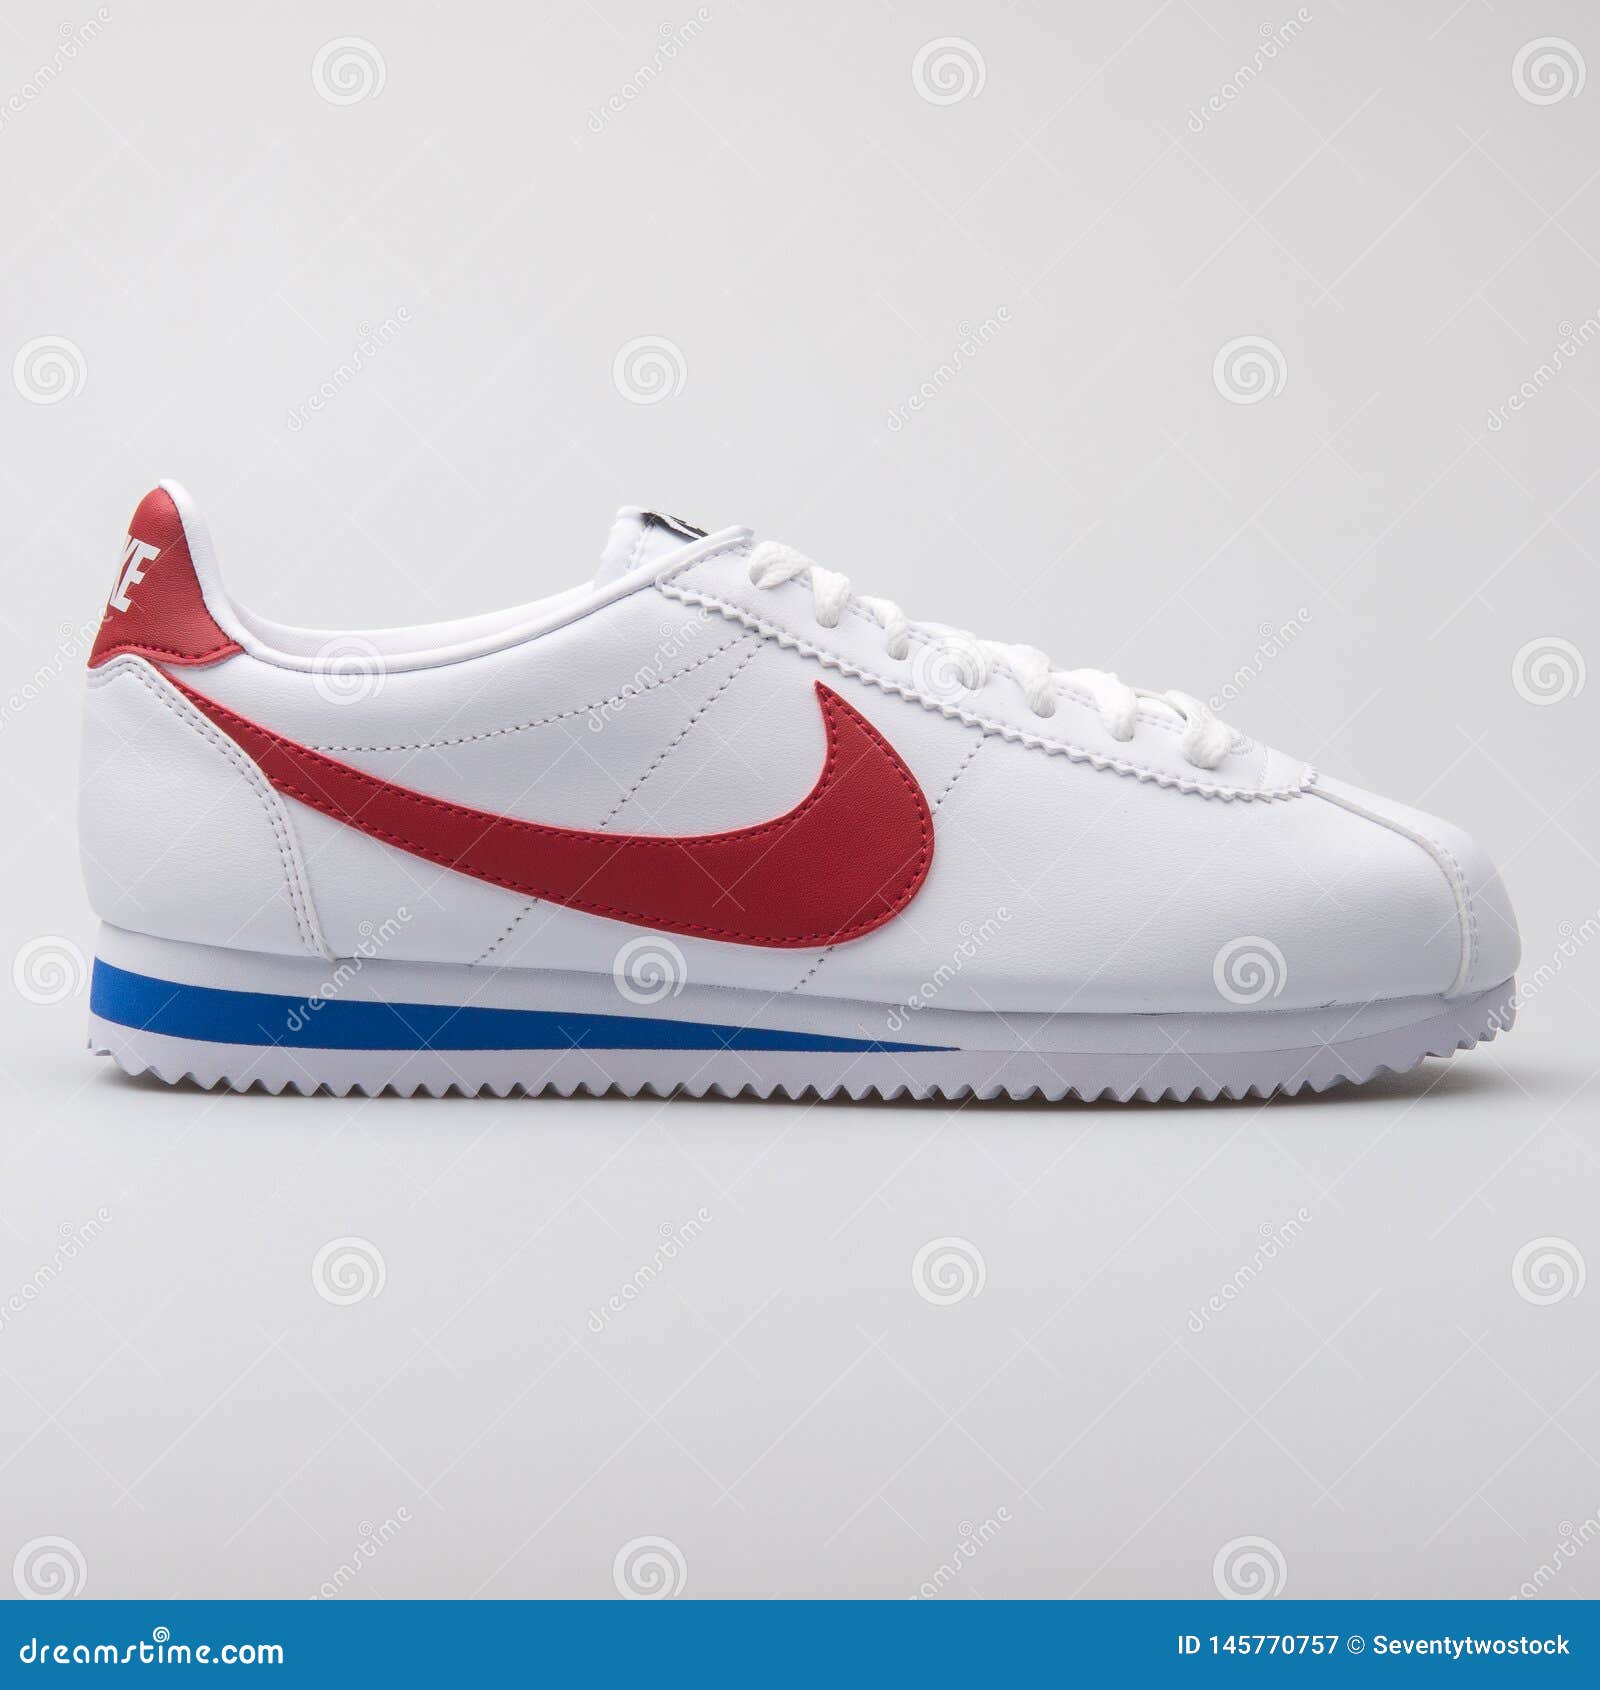 Nike Classic Cortez Leather White, Red and Blue Sneaker Editorial  Photography - Image of pair, product: 145770757